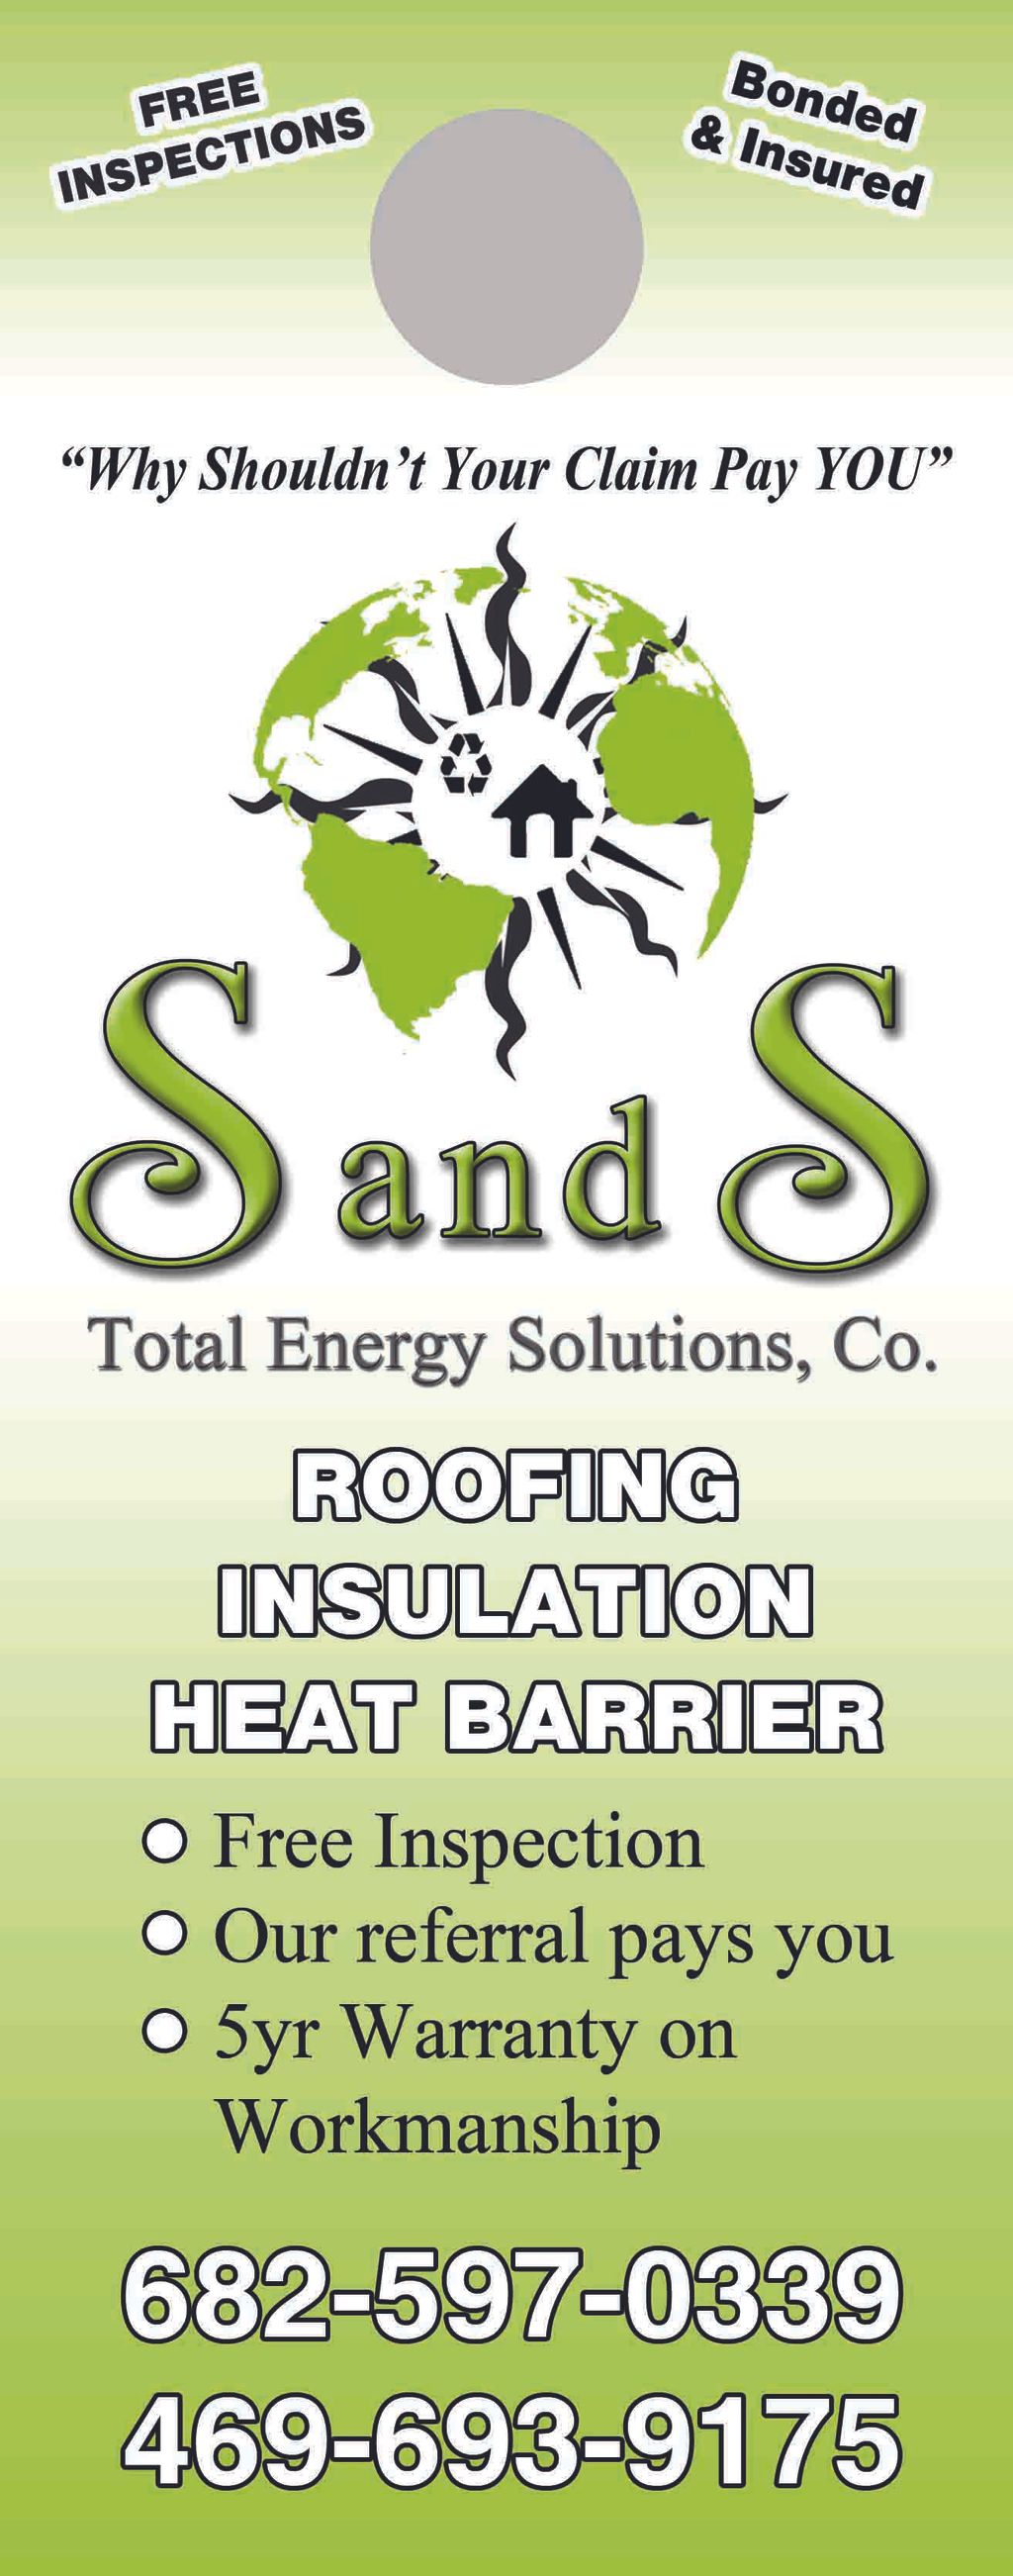 S & S Total Energy Solutions